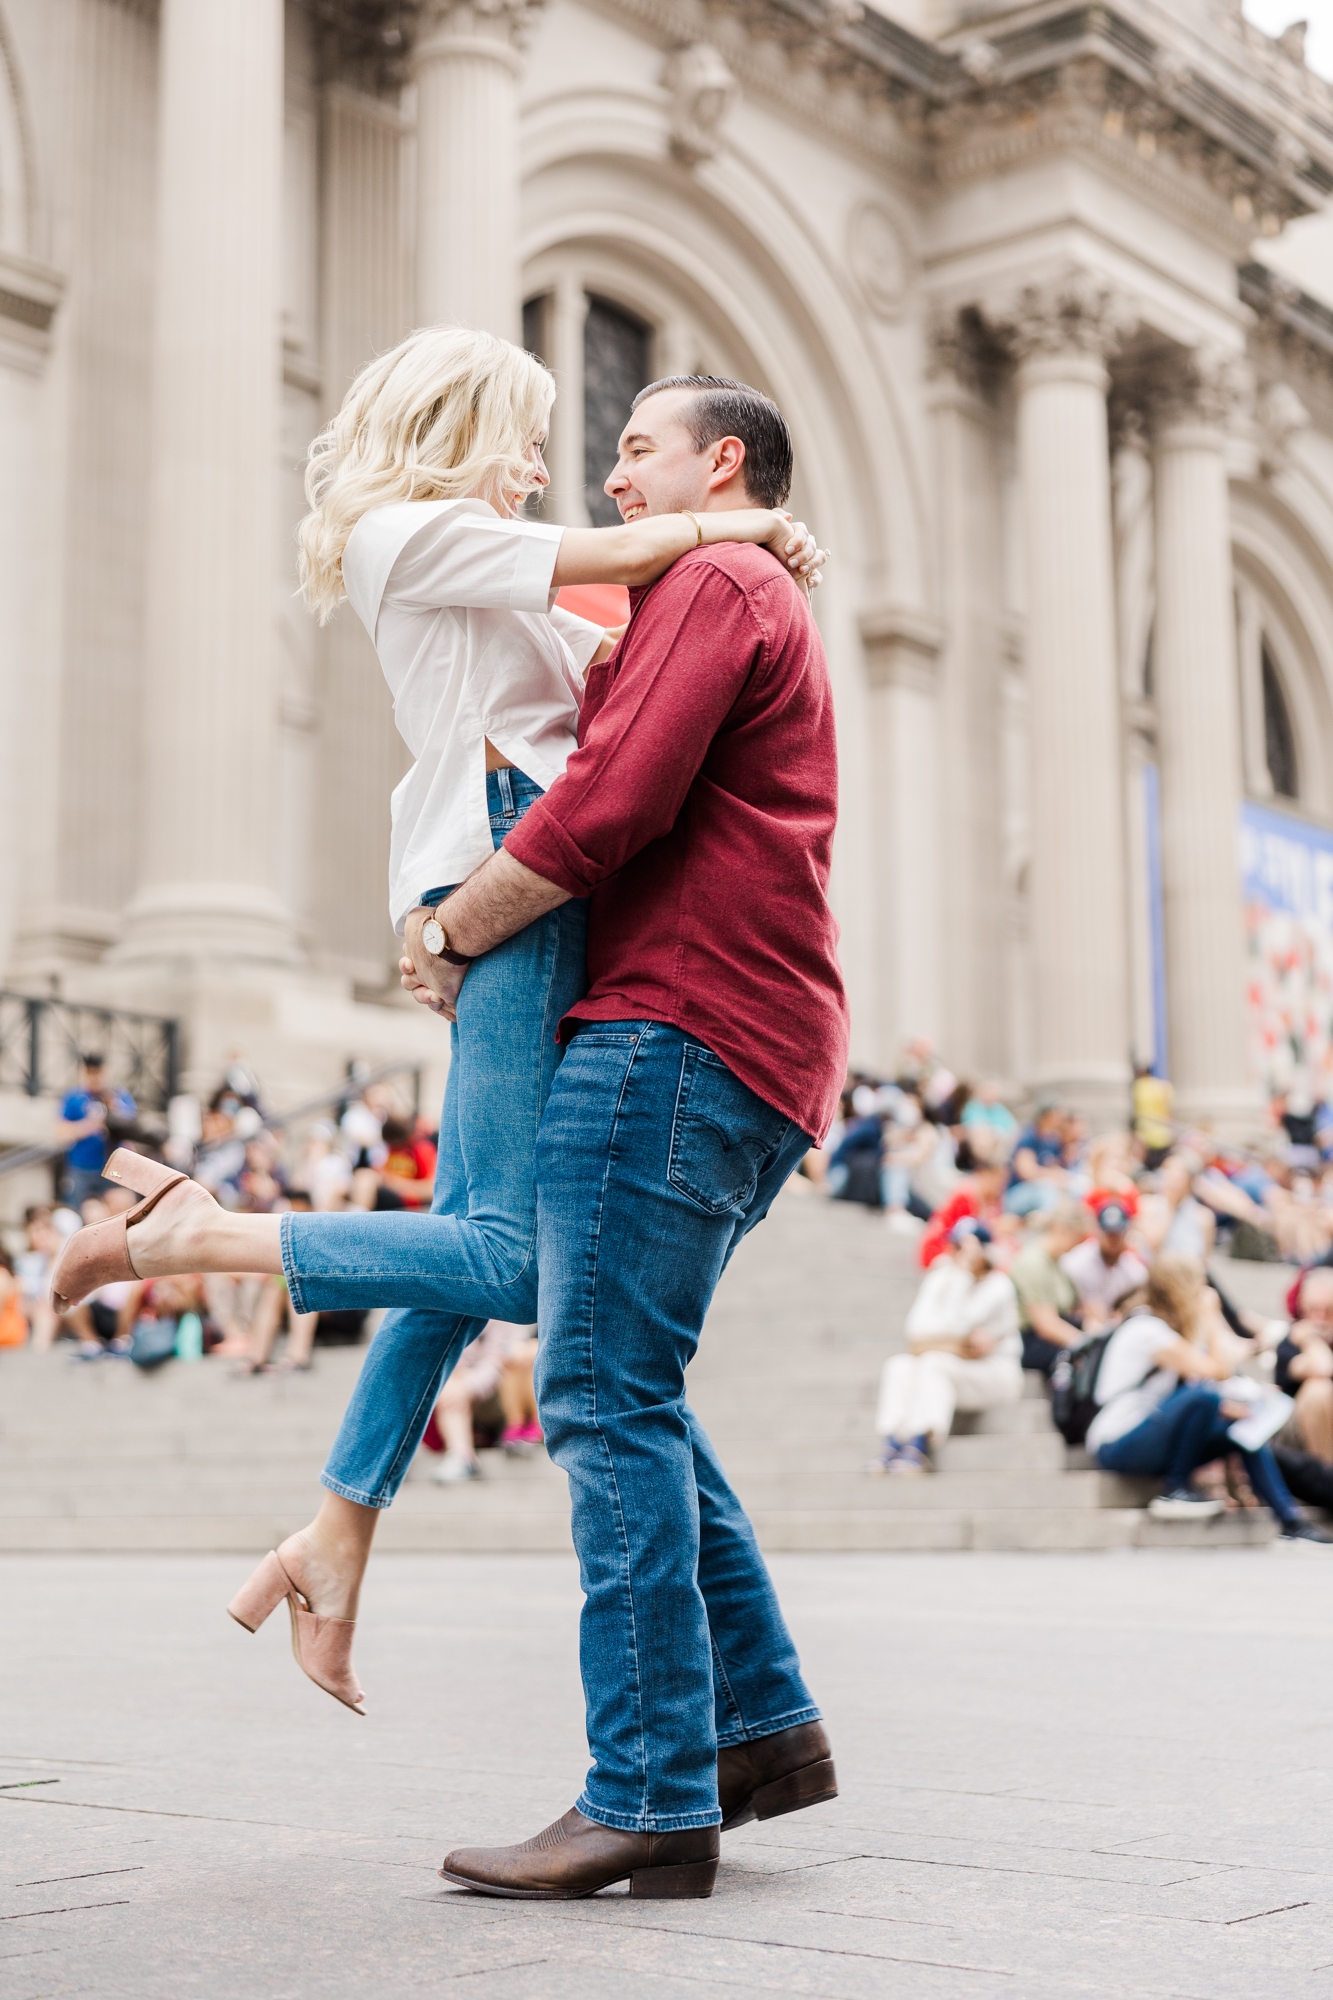 Amazing Engagement Session at Top of the Rock